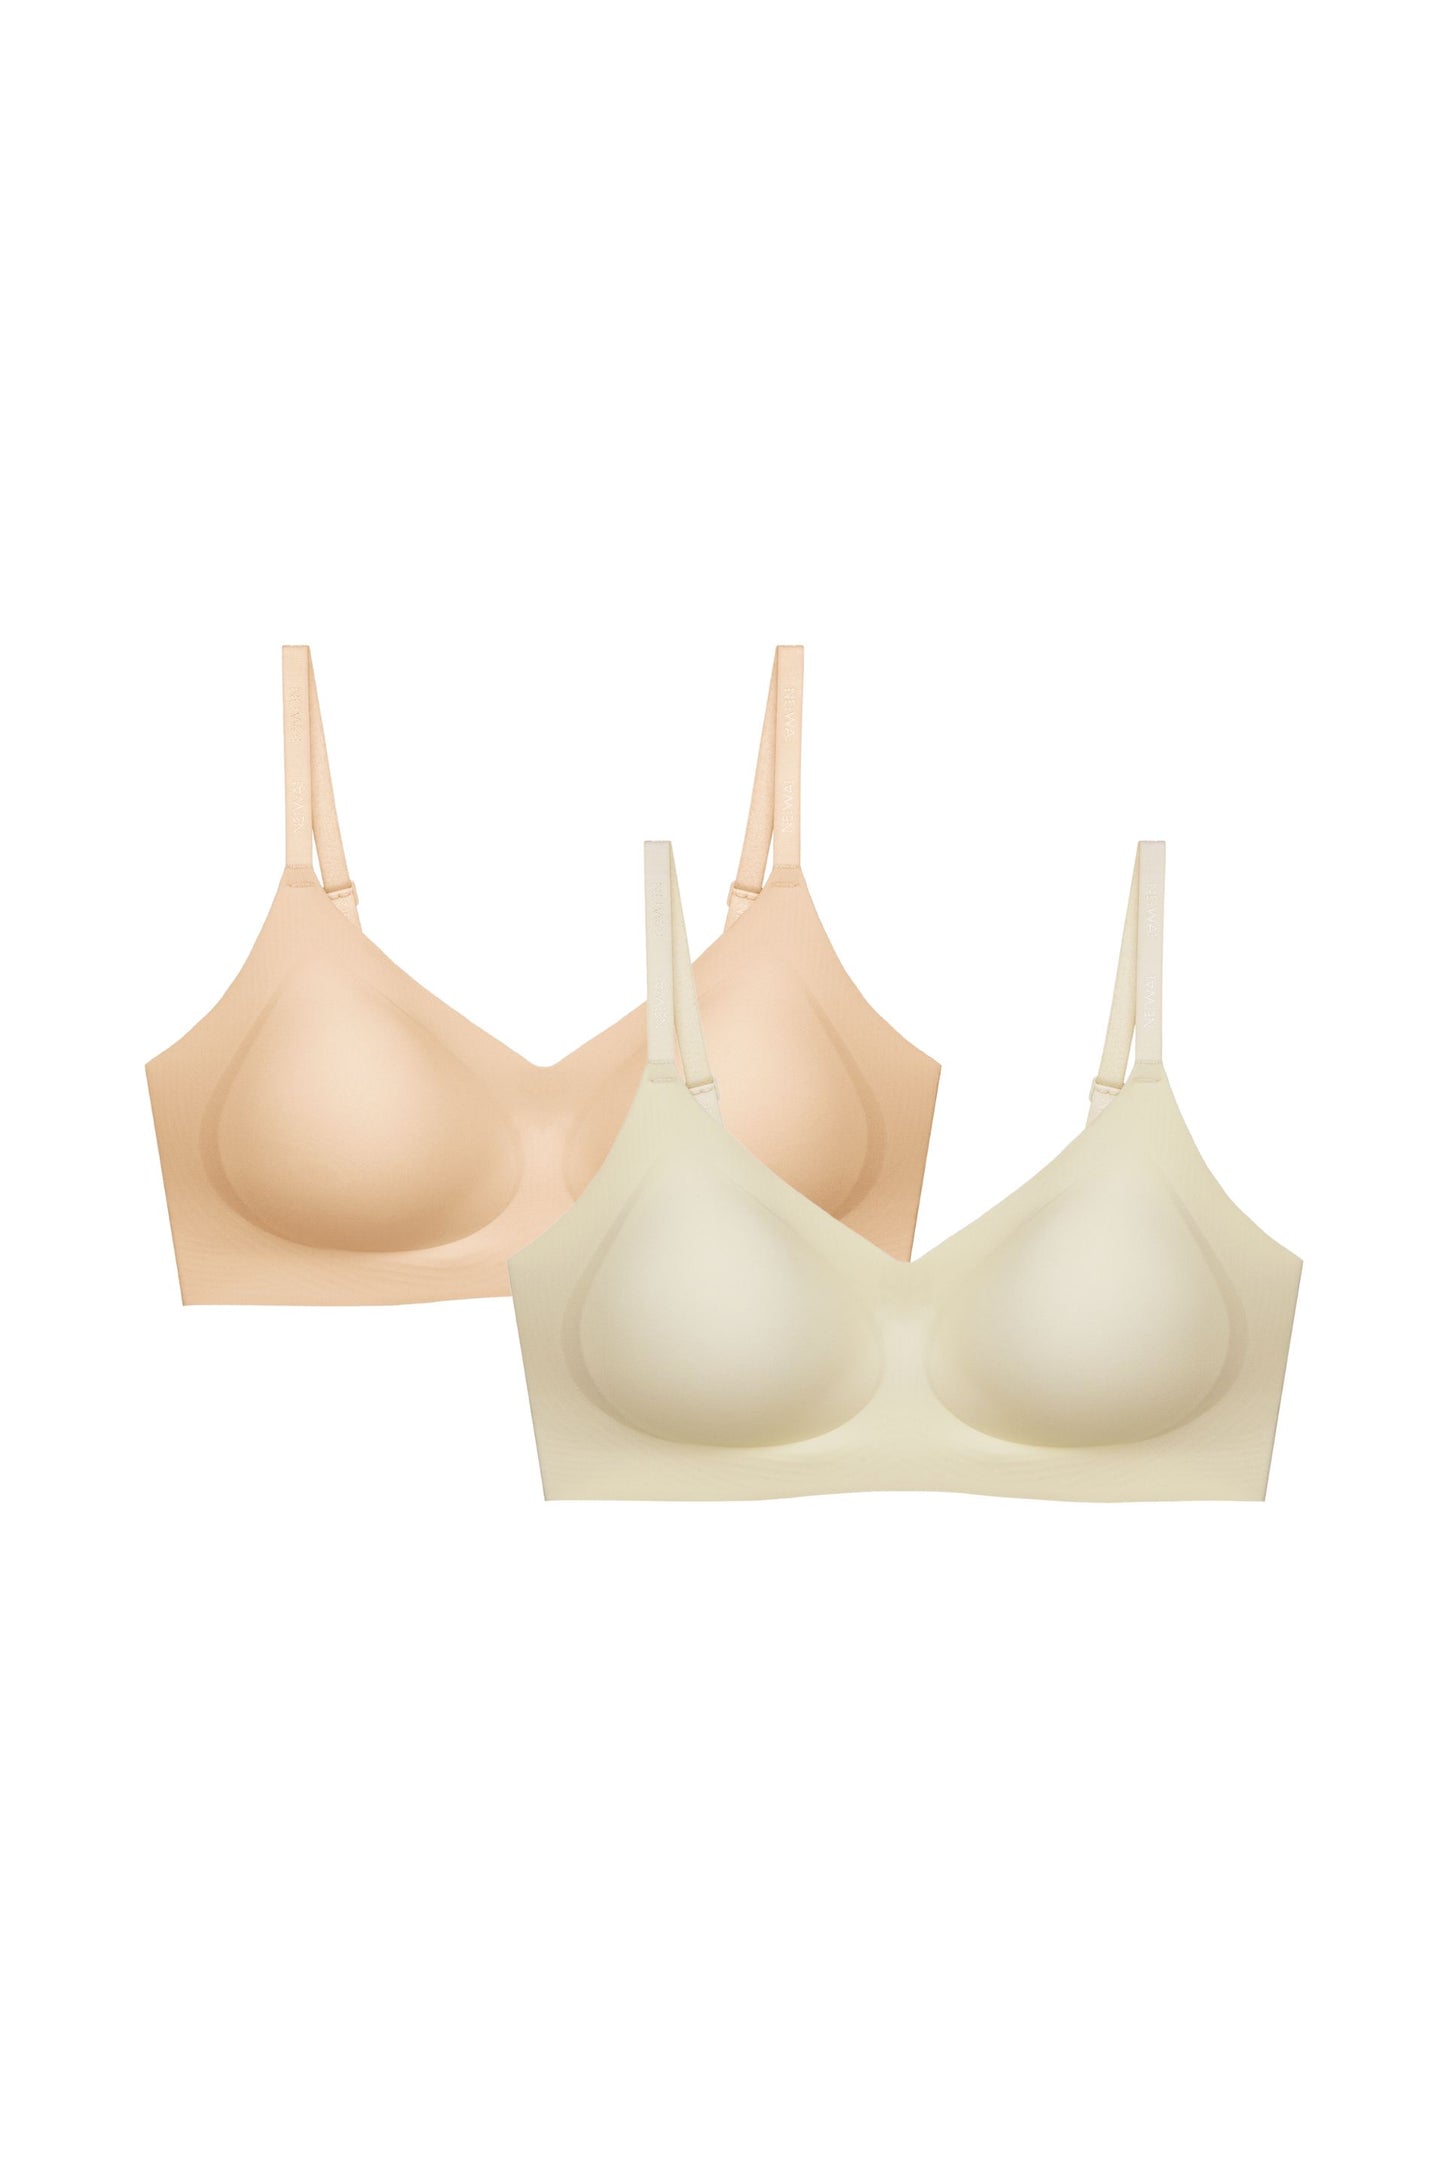 two bras in tan and cream